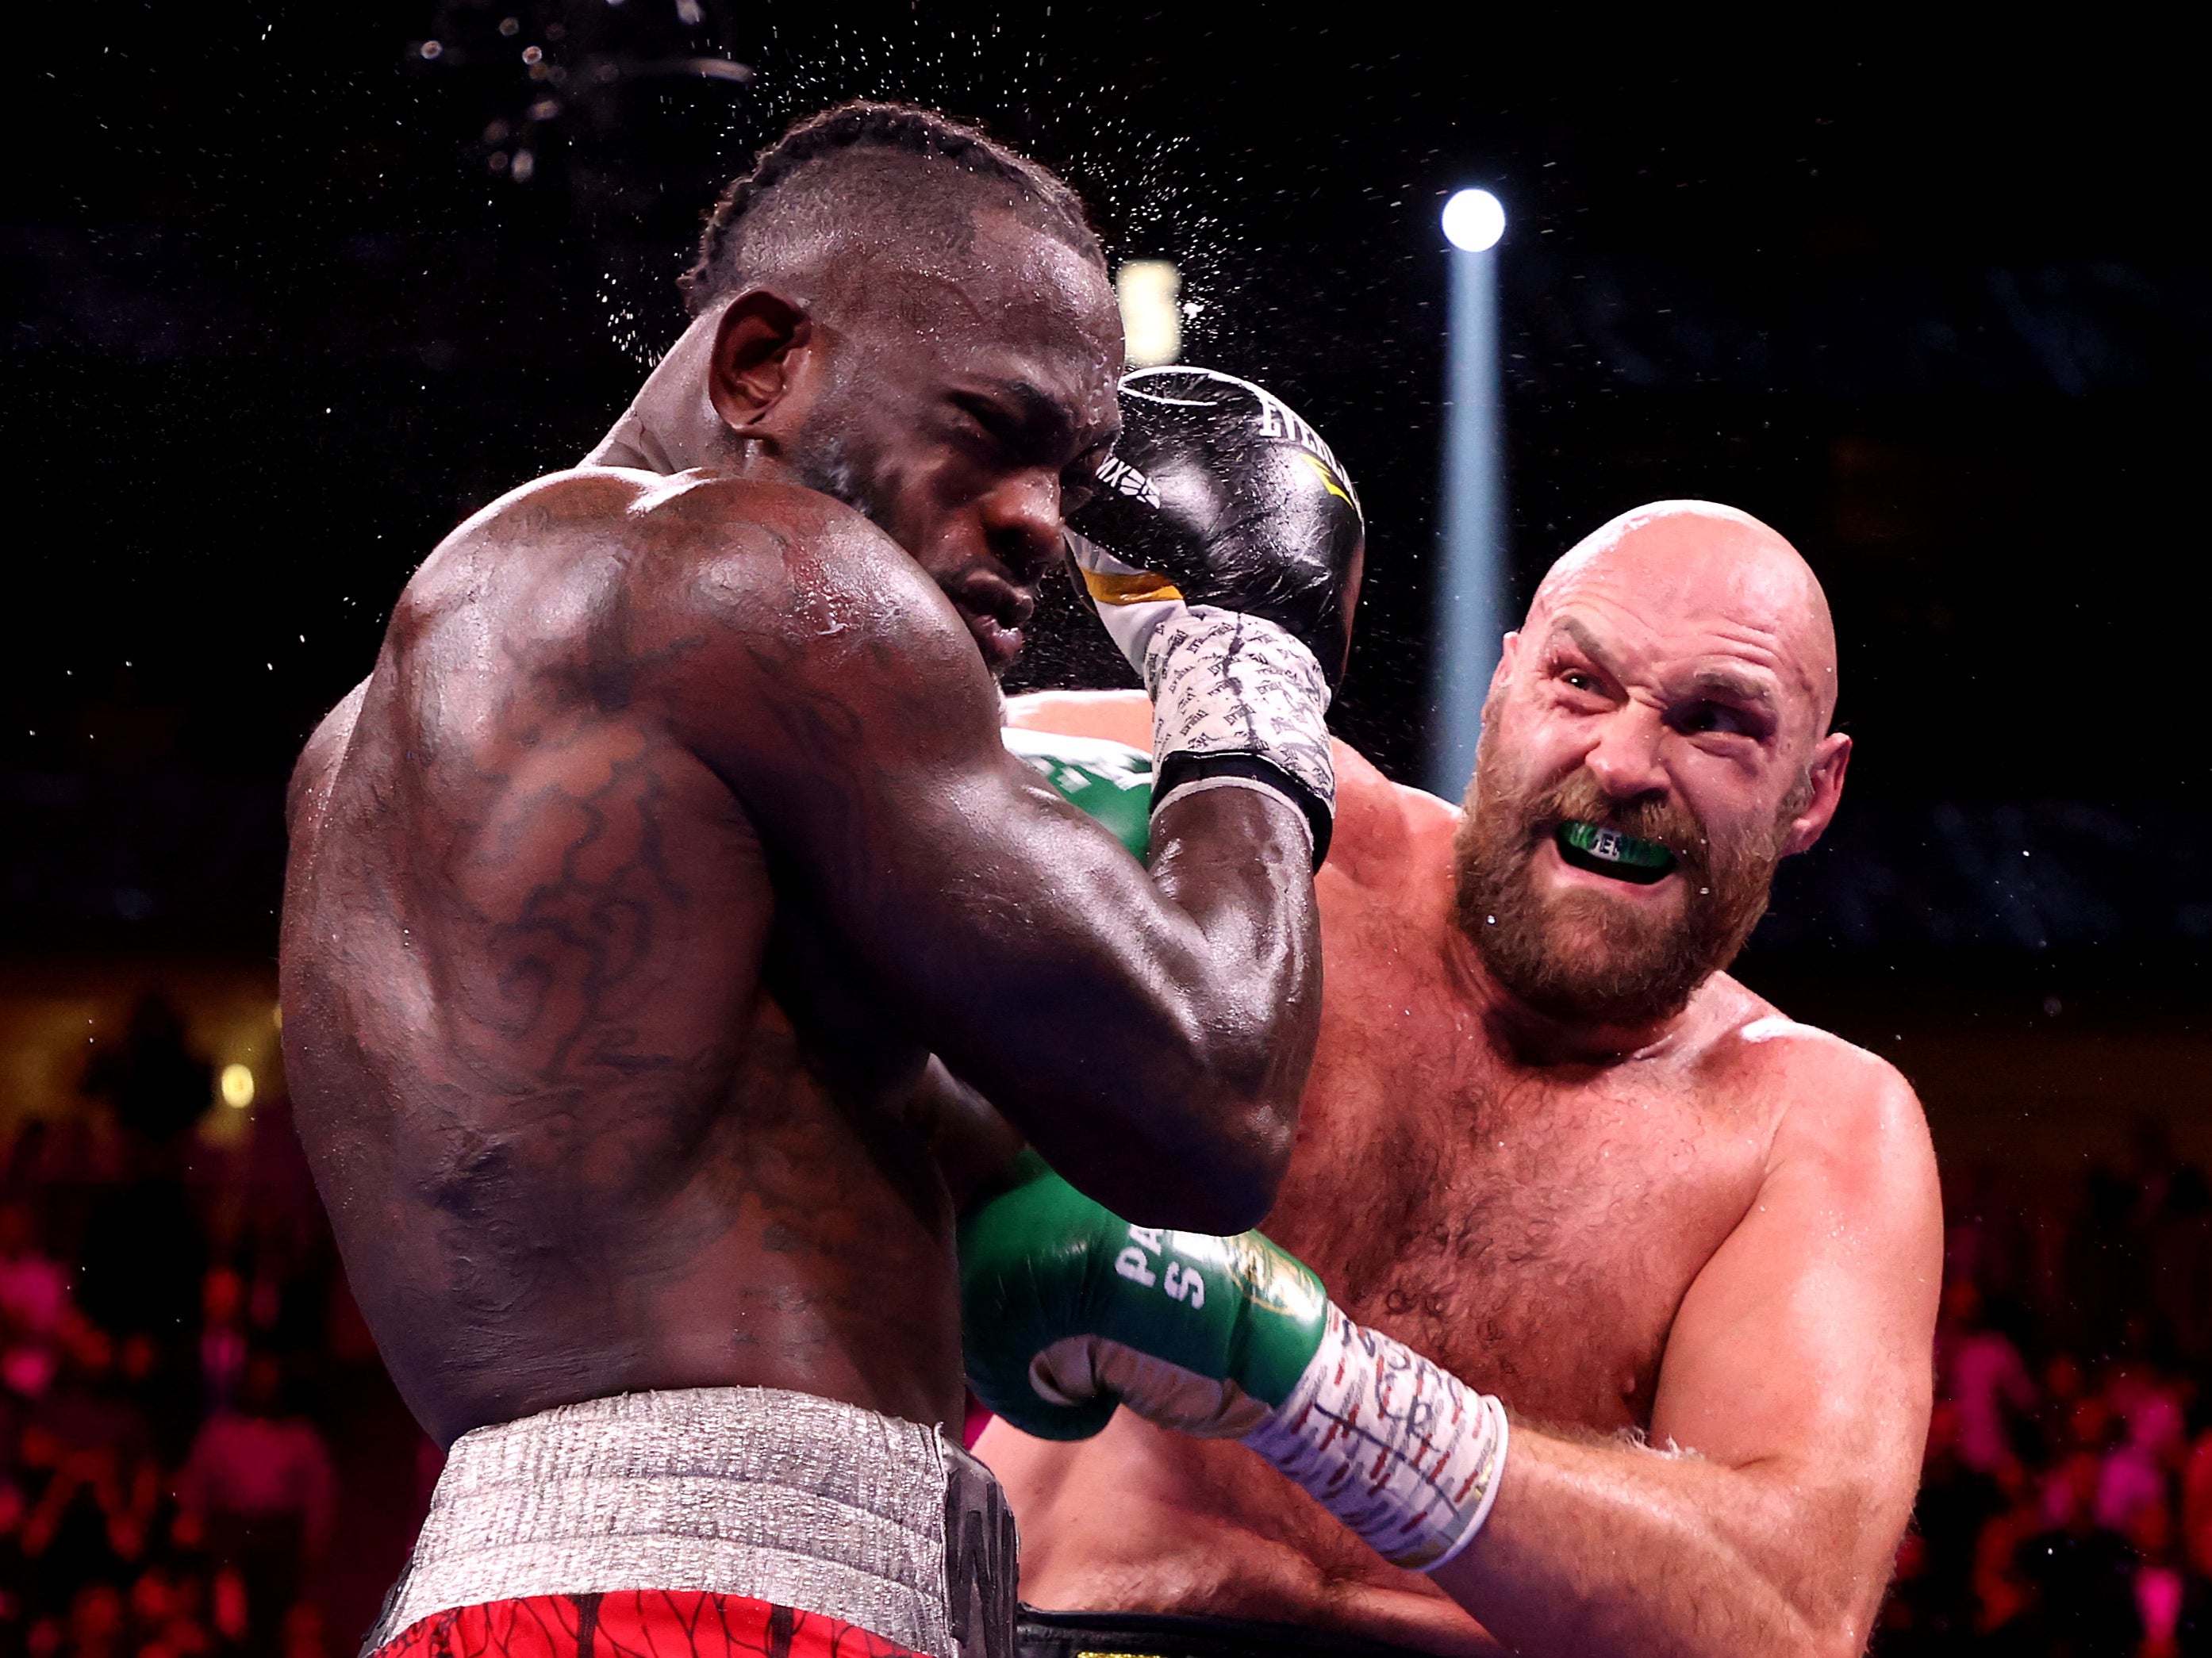 Tyson Fury punches Deontay Wilder during their WBC heavyweight title fight at T-Mobile Arena